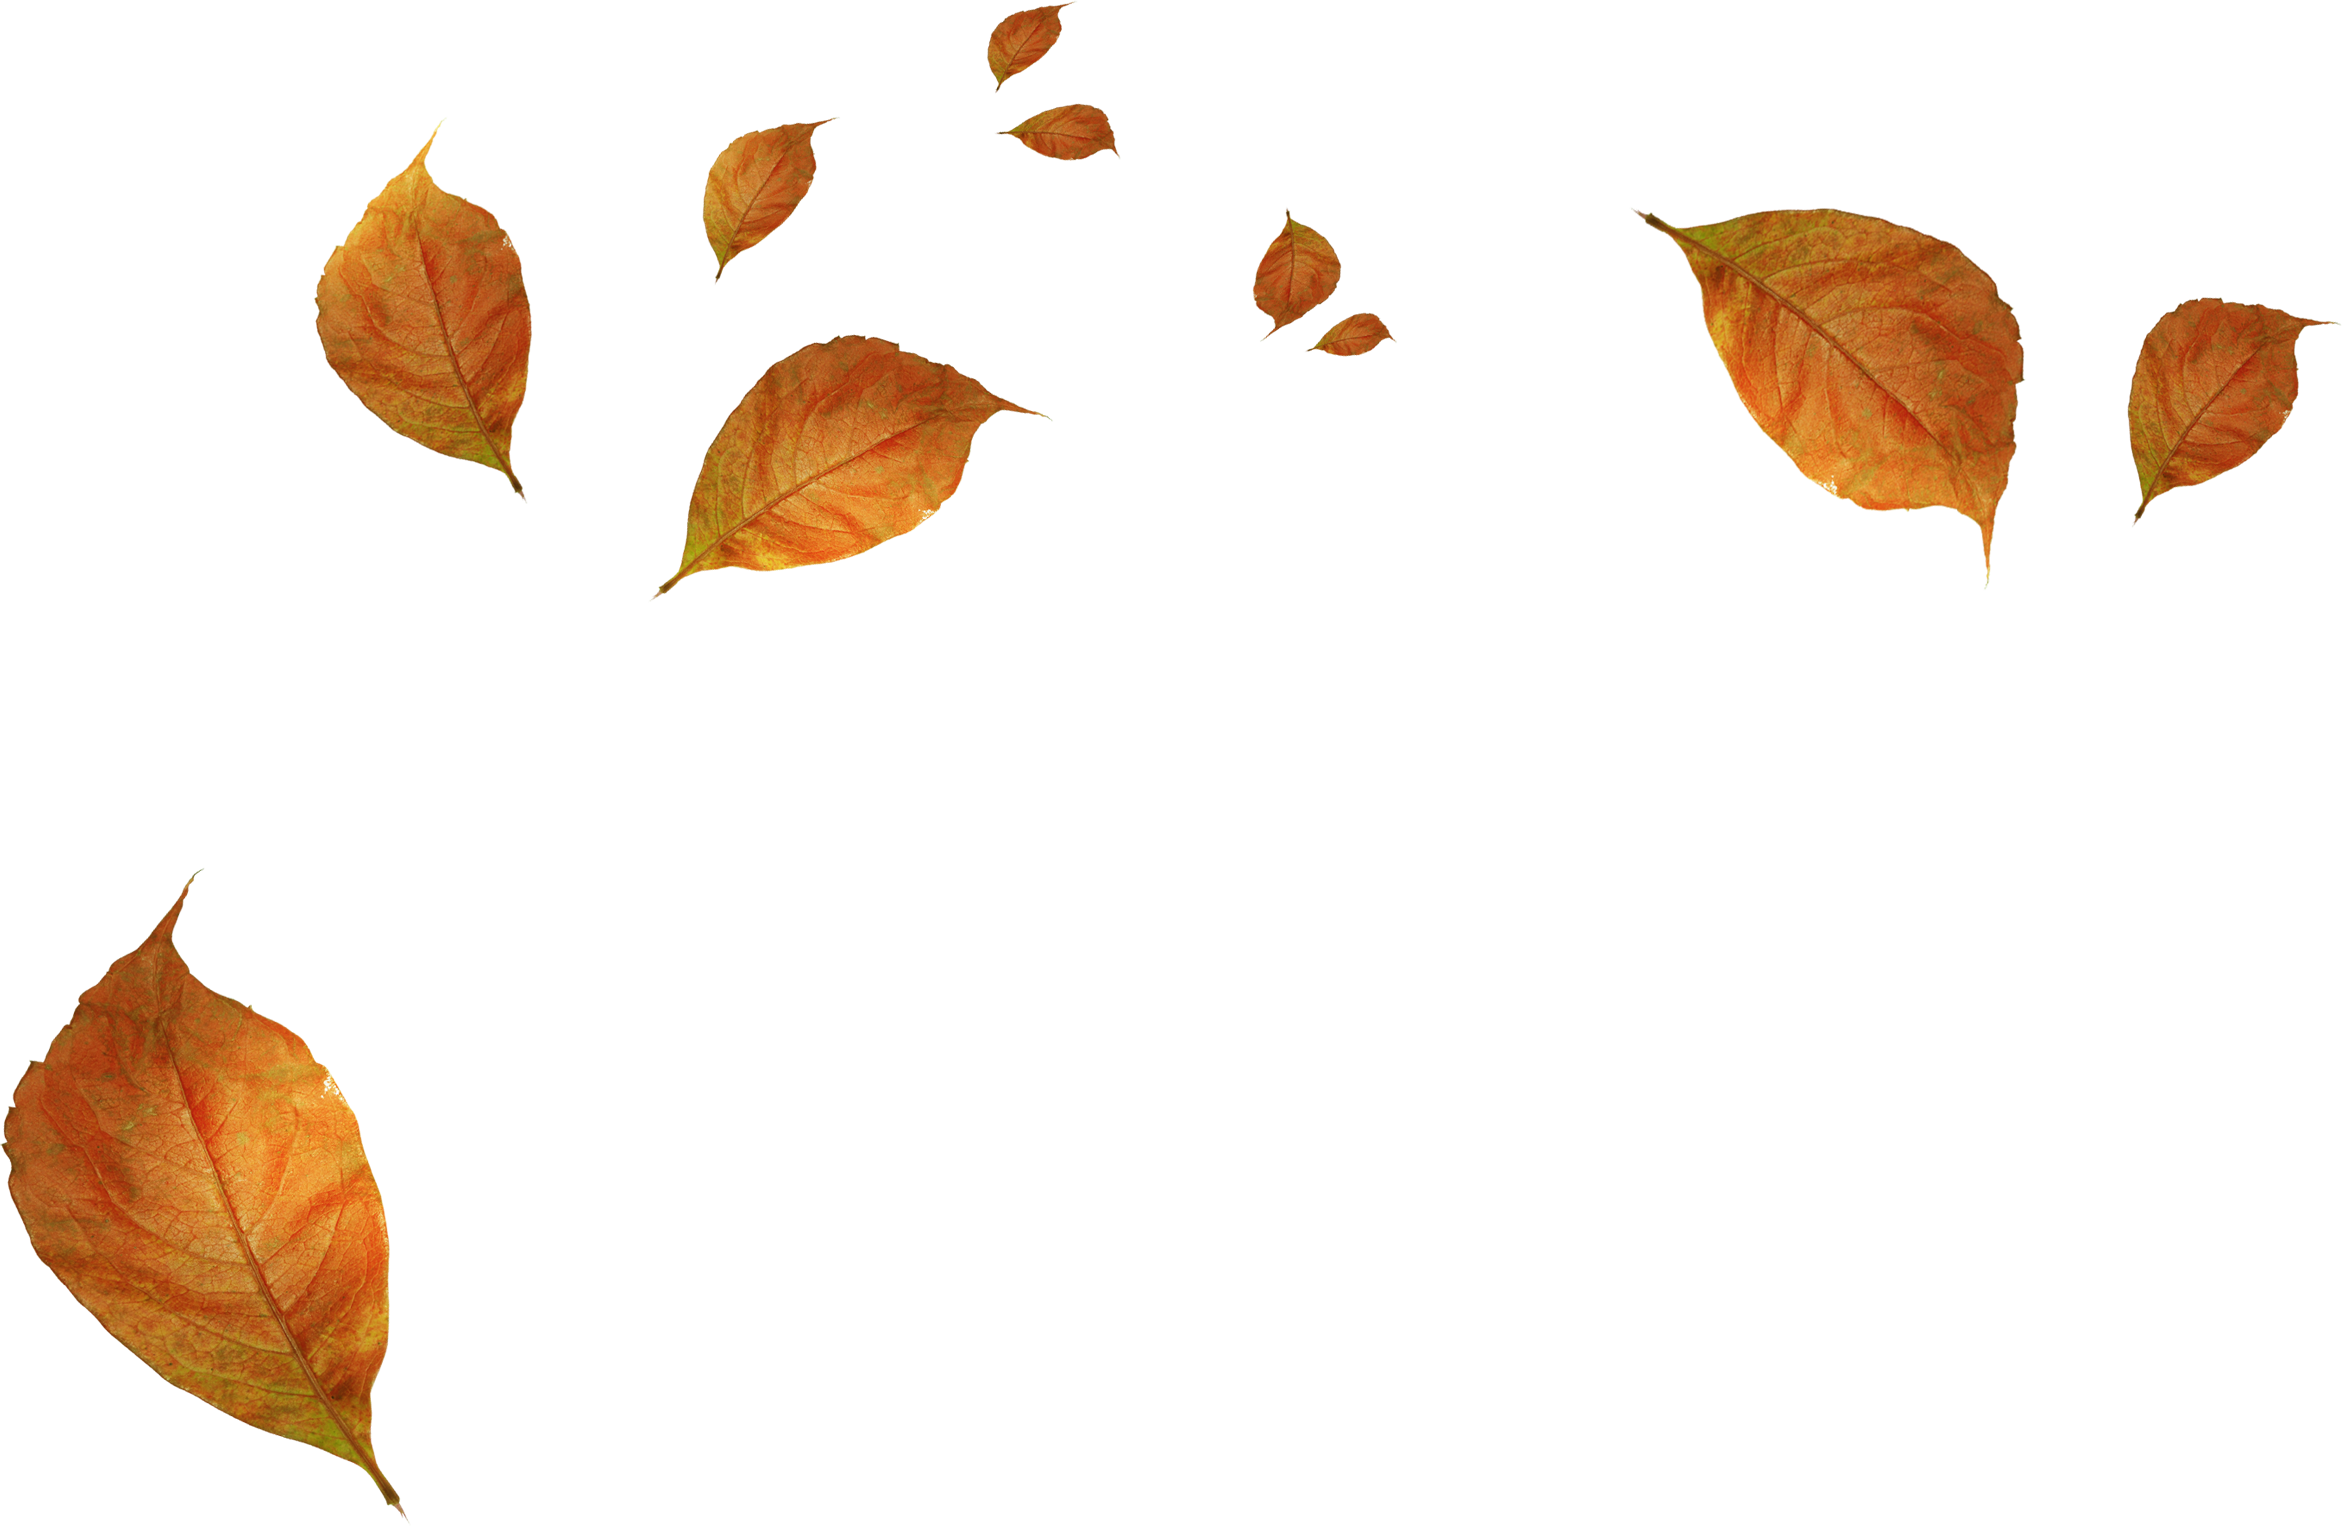 https://www.pngall.com/wp-content/uploads/13/Fall-Leaves-PNG-Pic.png